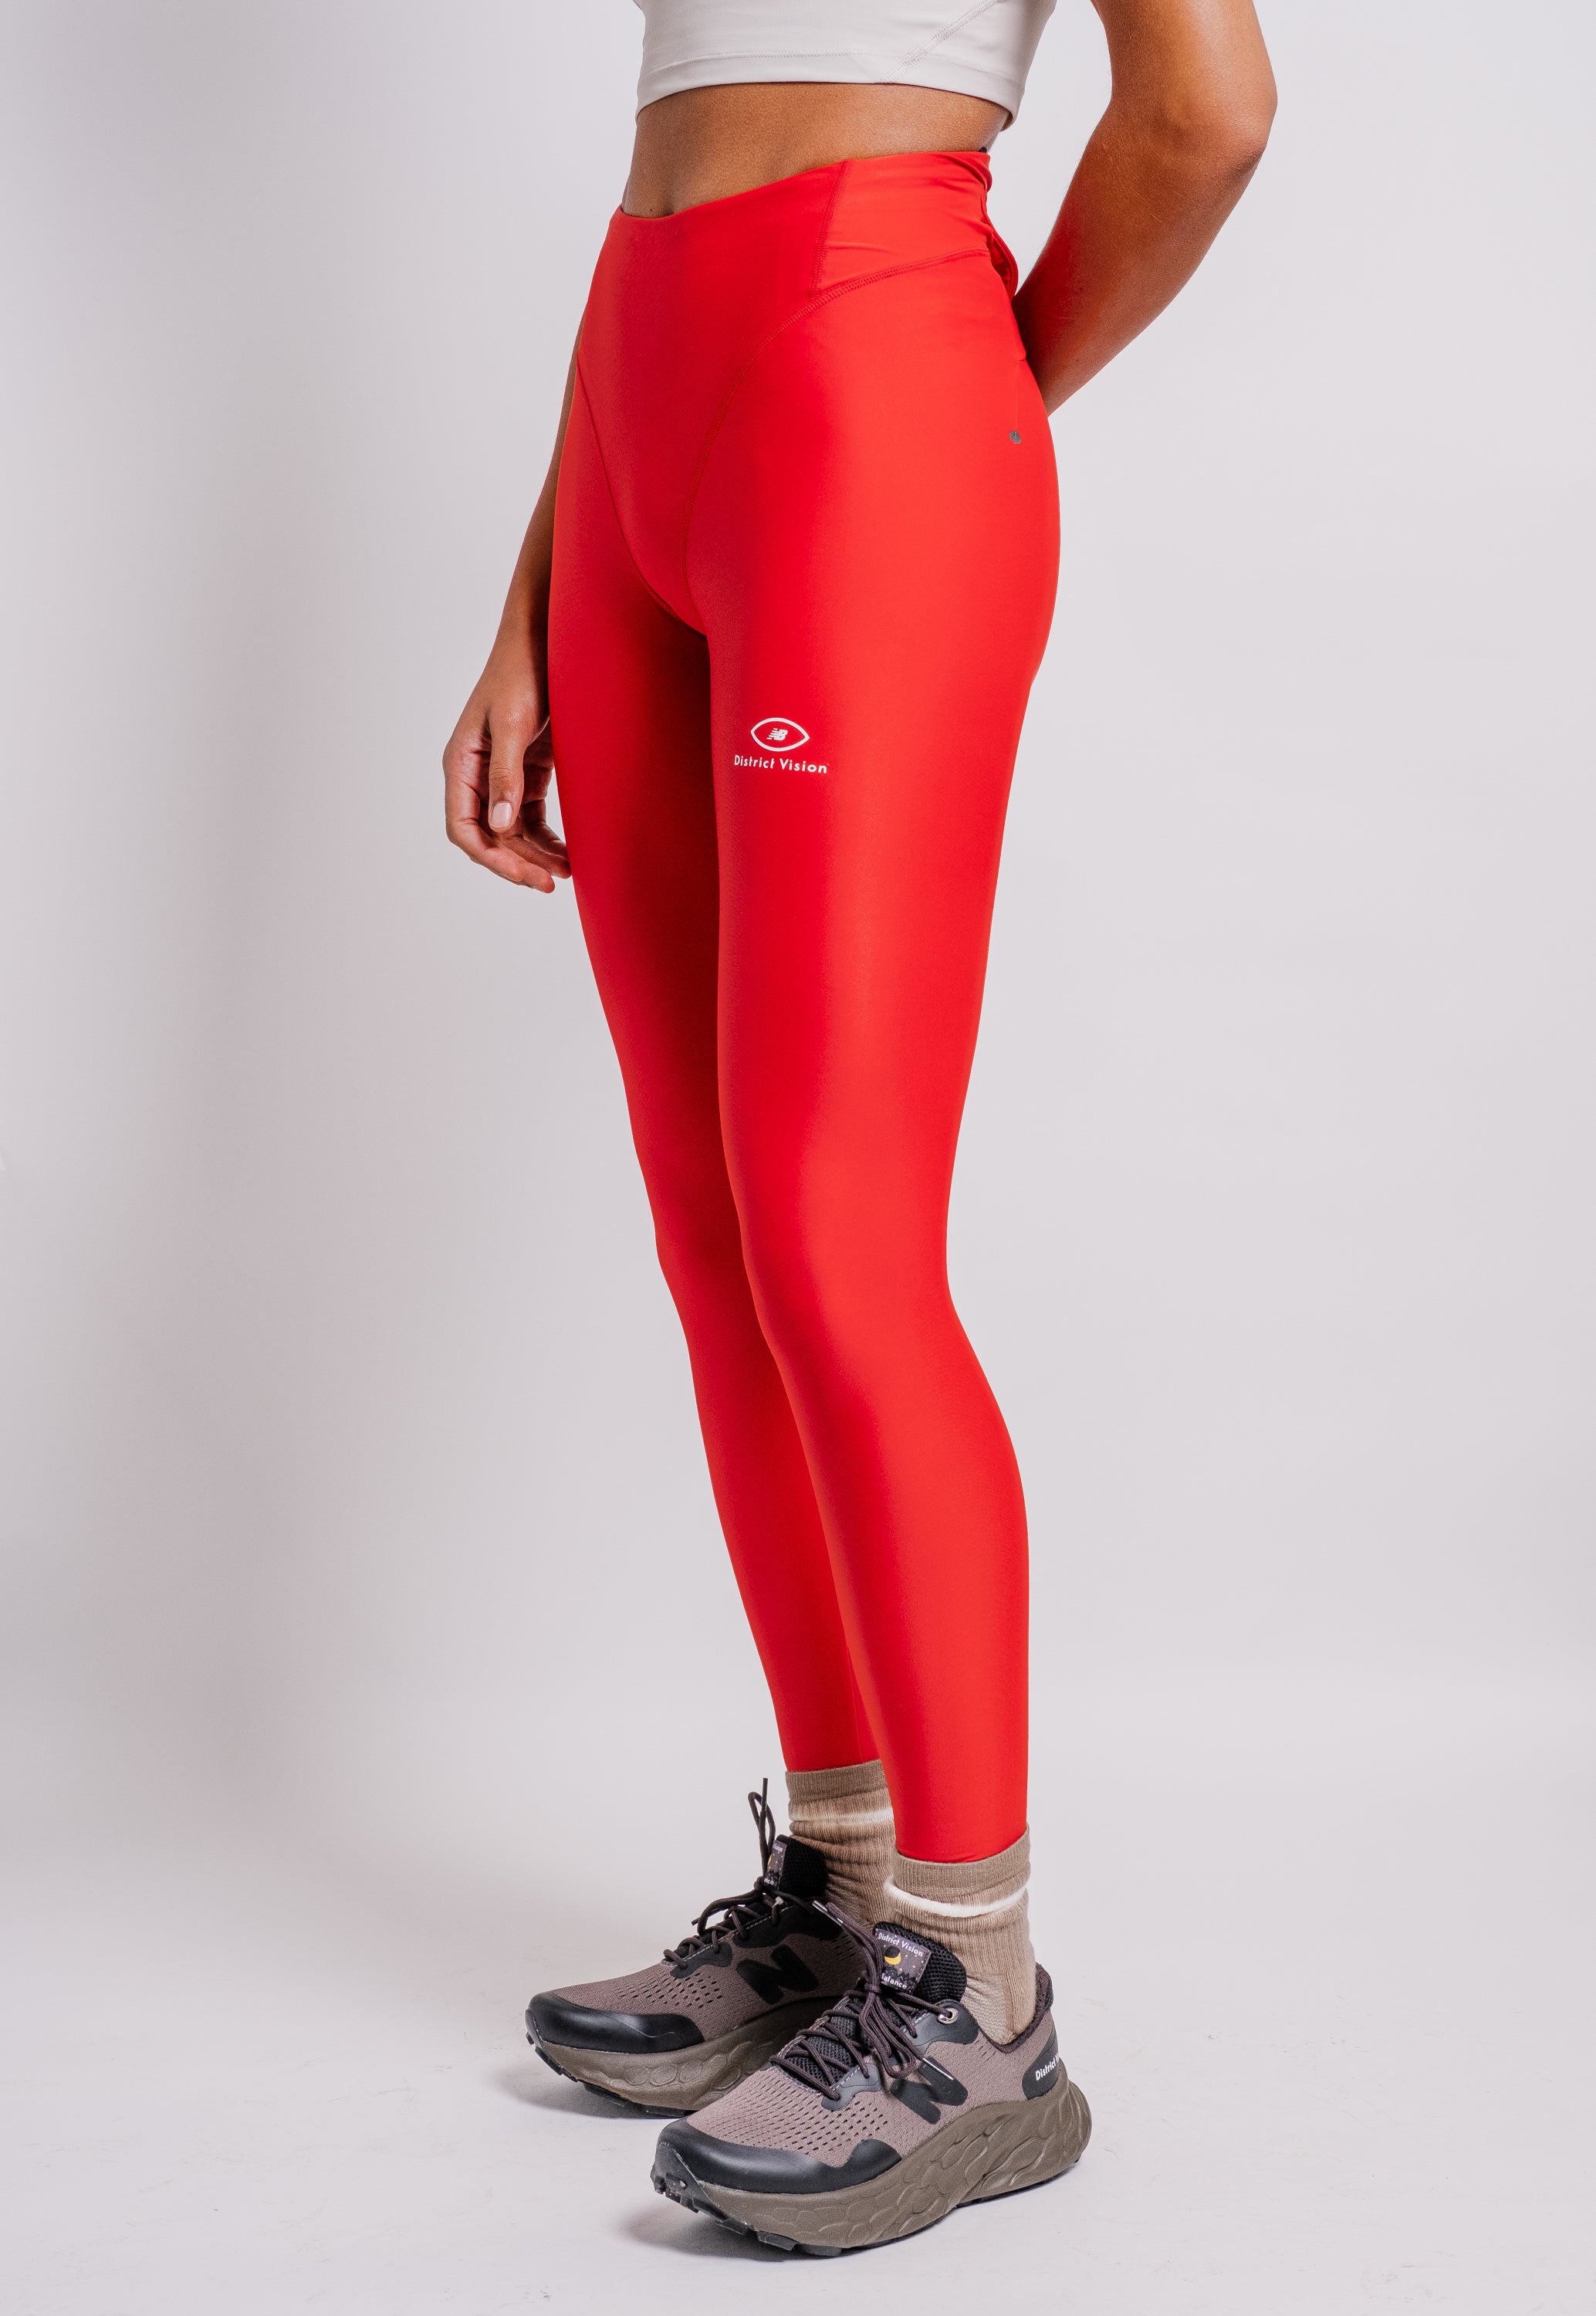 Newline WOMEN'S ATHLETIC TIGHTS - TANGO RED